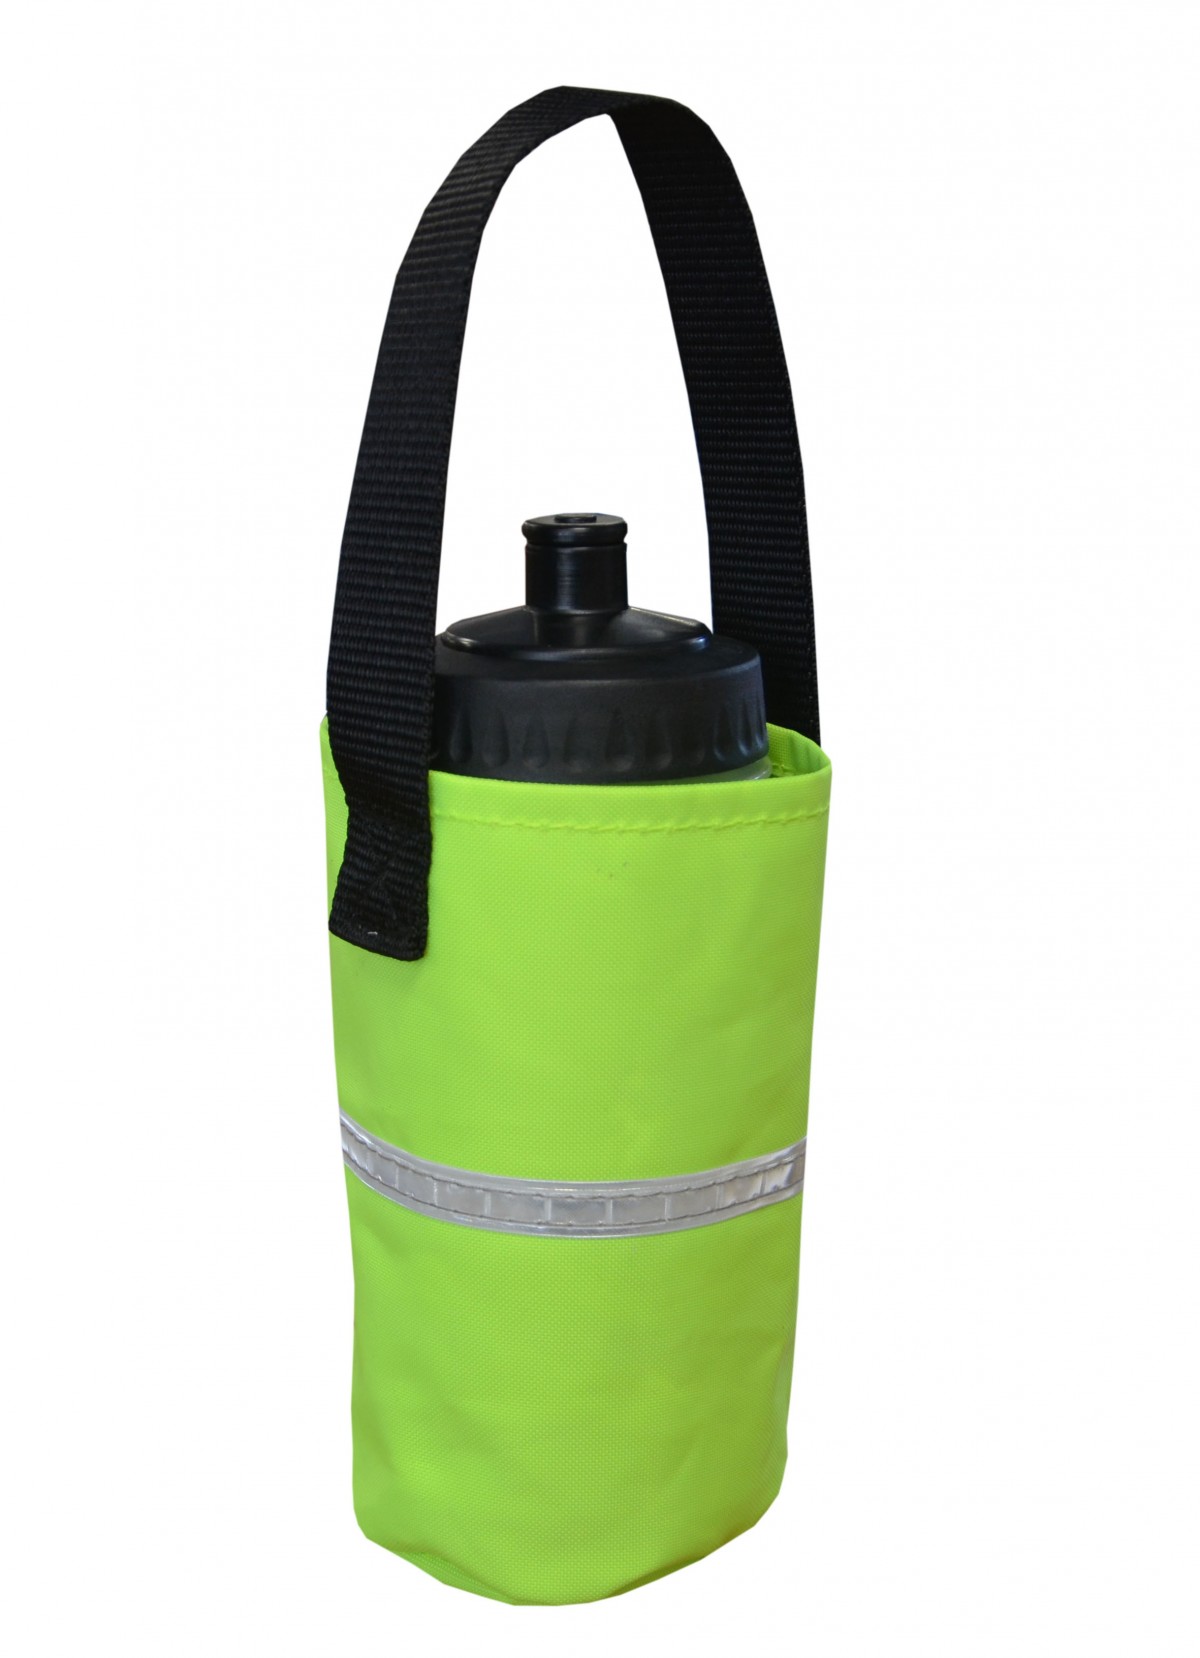 Cross Body Water Bottle Sling Bag. Benefits rescue FTTF, Accessory carries  a 32oz tumbler / large bottle, Pocket carries Phone, cards, money